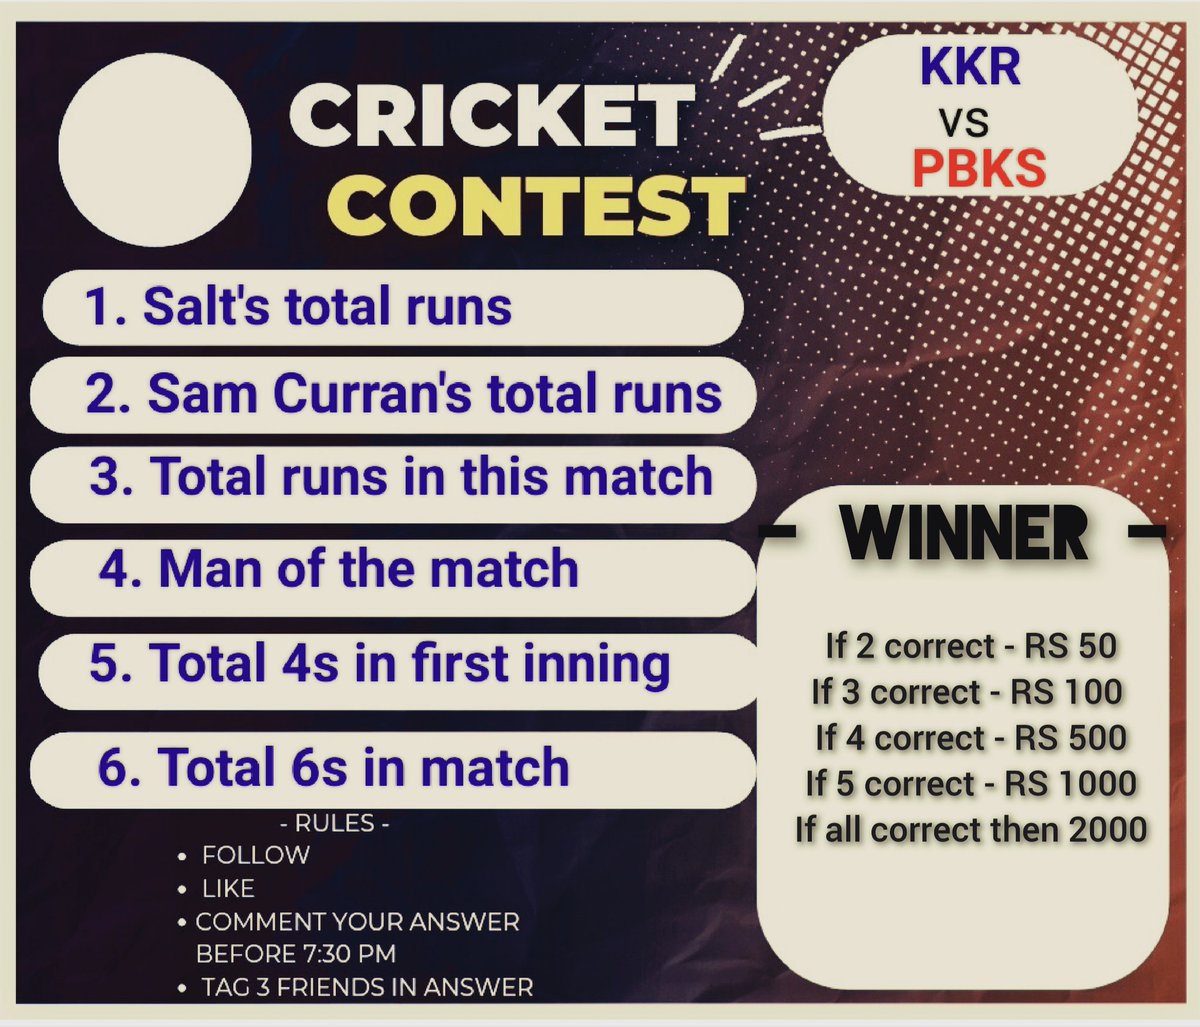 .              🚨Alert 🚨
⚡ Now prediction time ⚡
       🤑 Win real cash 🤑
            Match no. - 42
               #KKRvPBKS

Rule : follow me, Like, Retweet, comment answer with 3 friends tag & answer before 7:30pm
#Giveaways #IPL #IPLUpdate  #KKRvsPBKS  #PBKSvKKR #IPL2024